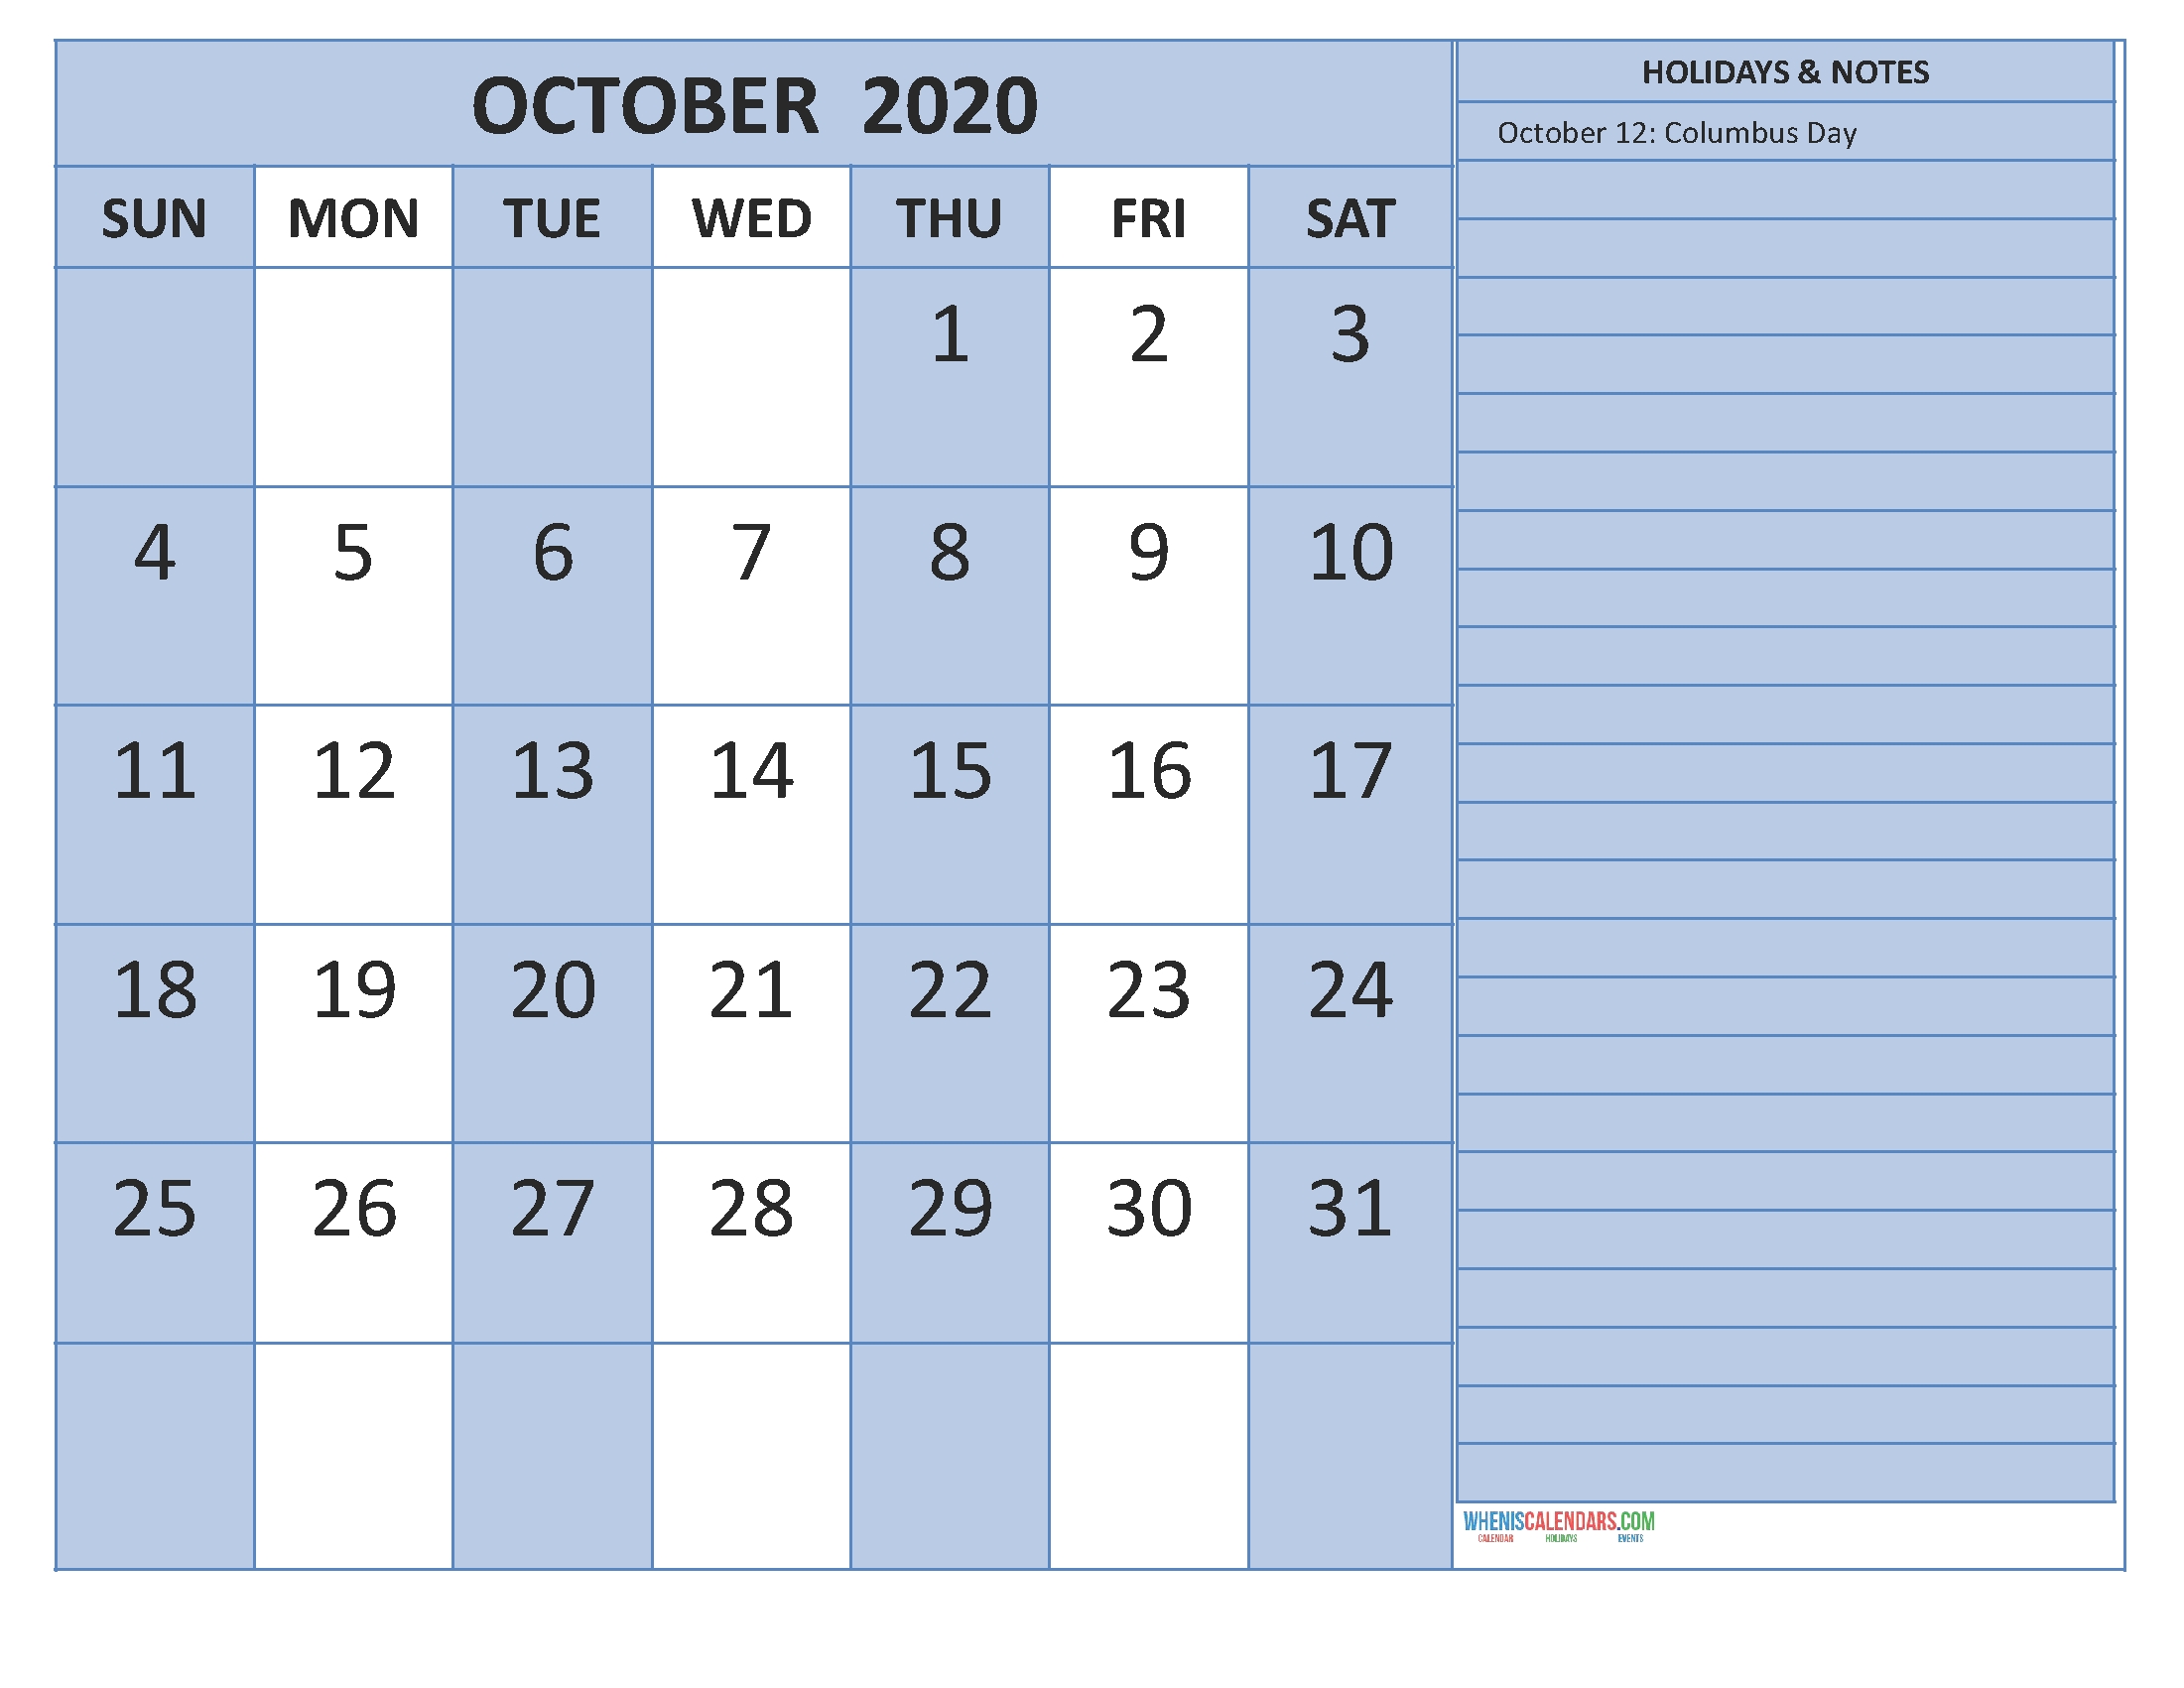 October 2020 Calendar With Holidays Word, Pdf | Free-October 2020 Calendar Jewish Holidays